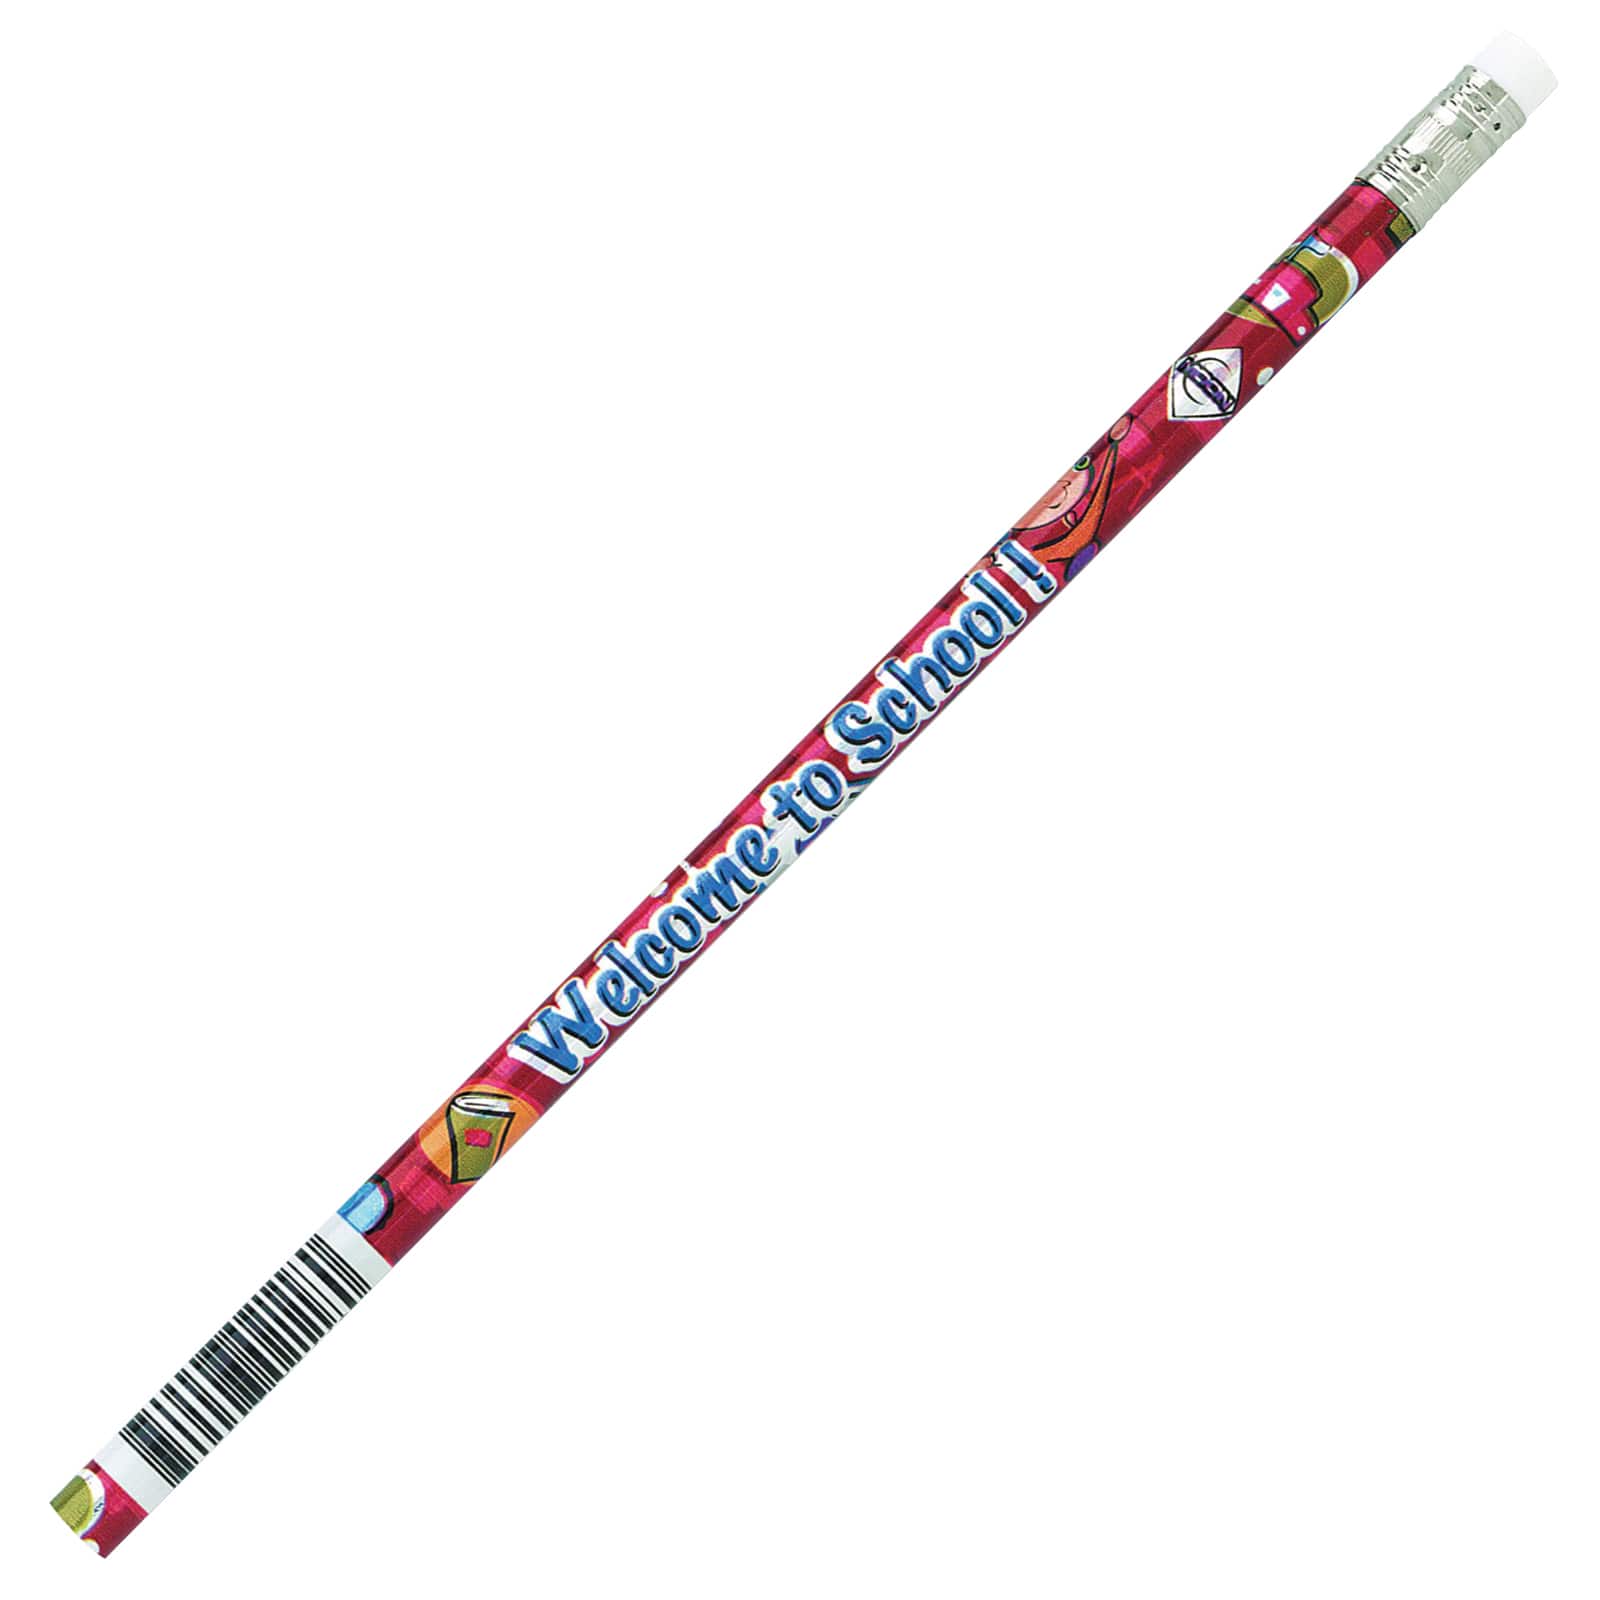 J. R. Moon Pencil Co. Welcome To School Pencils, 12 Per Pack - 12 Packs